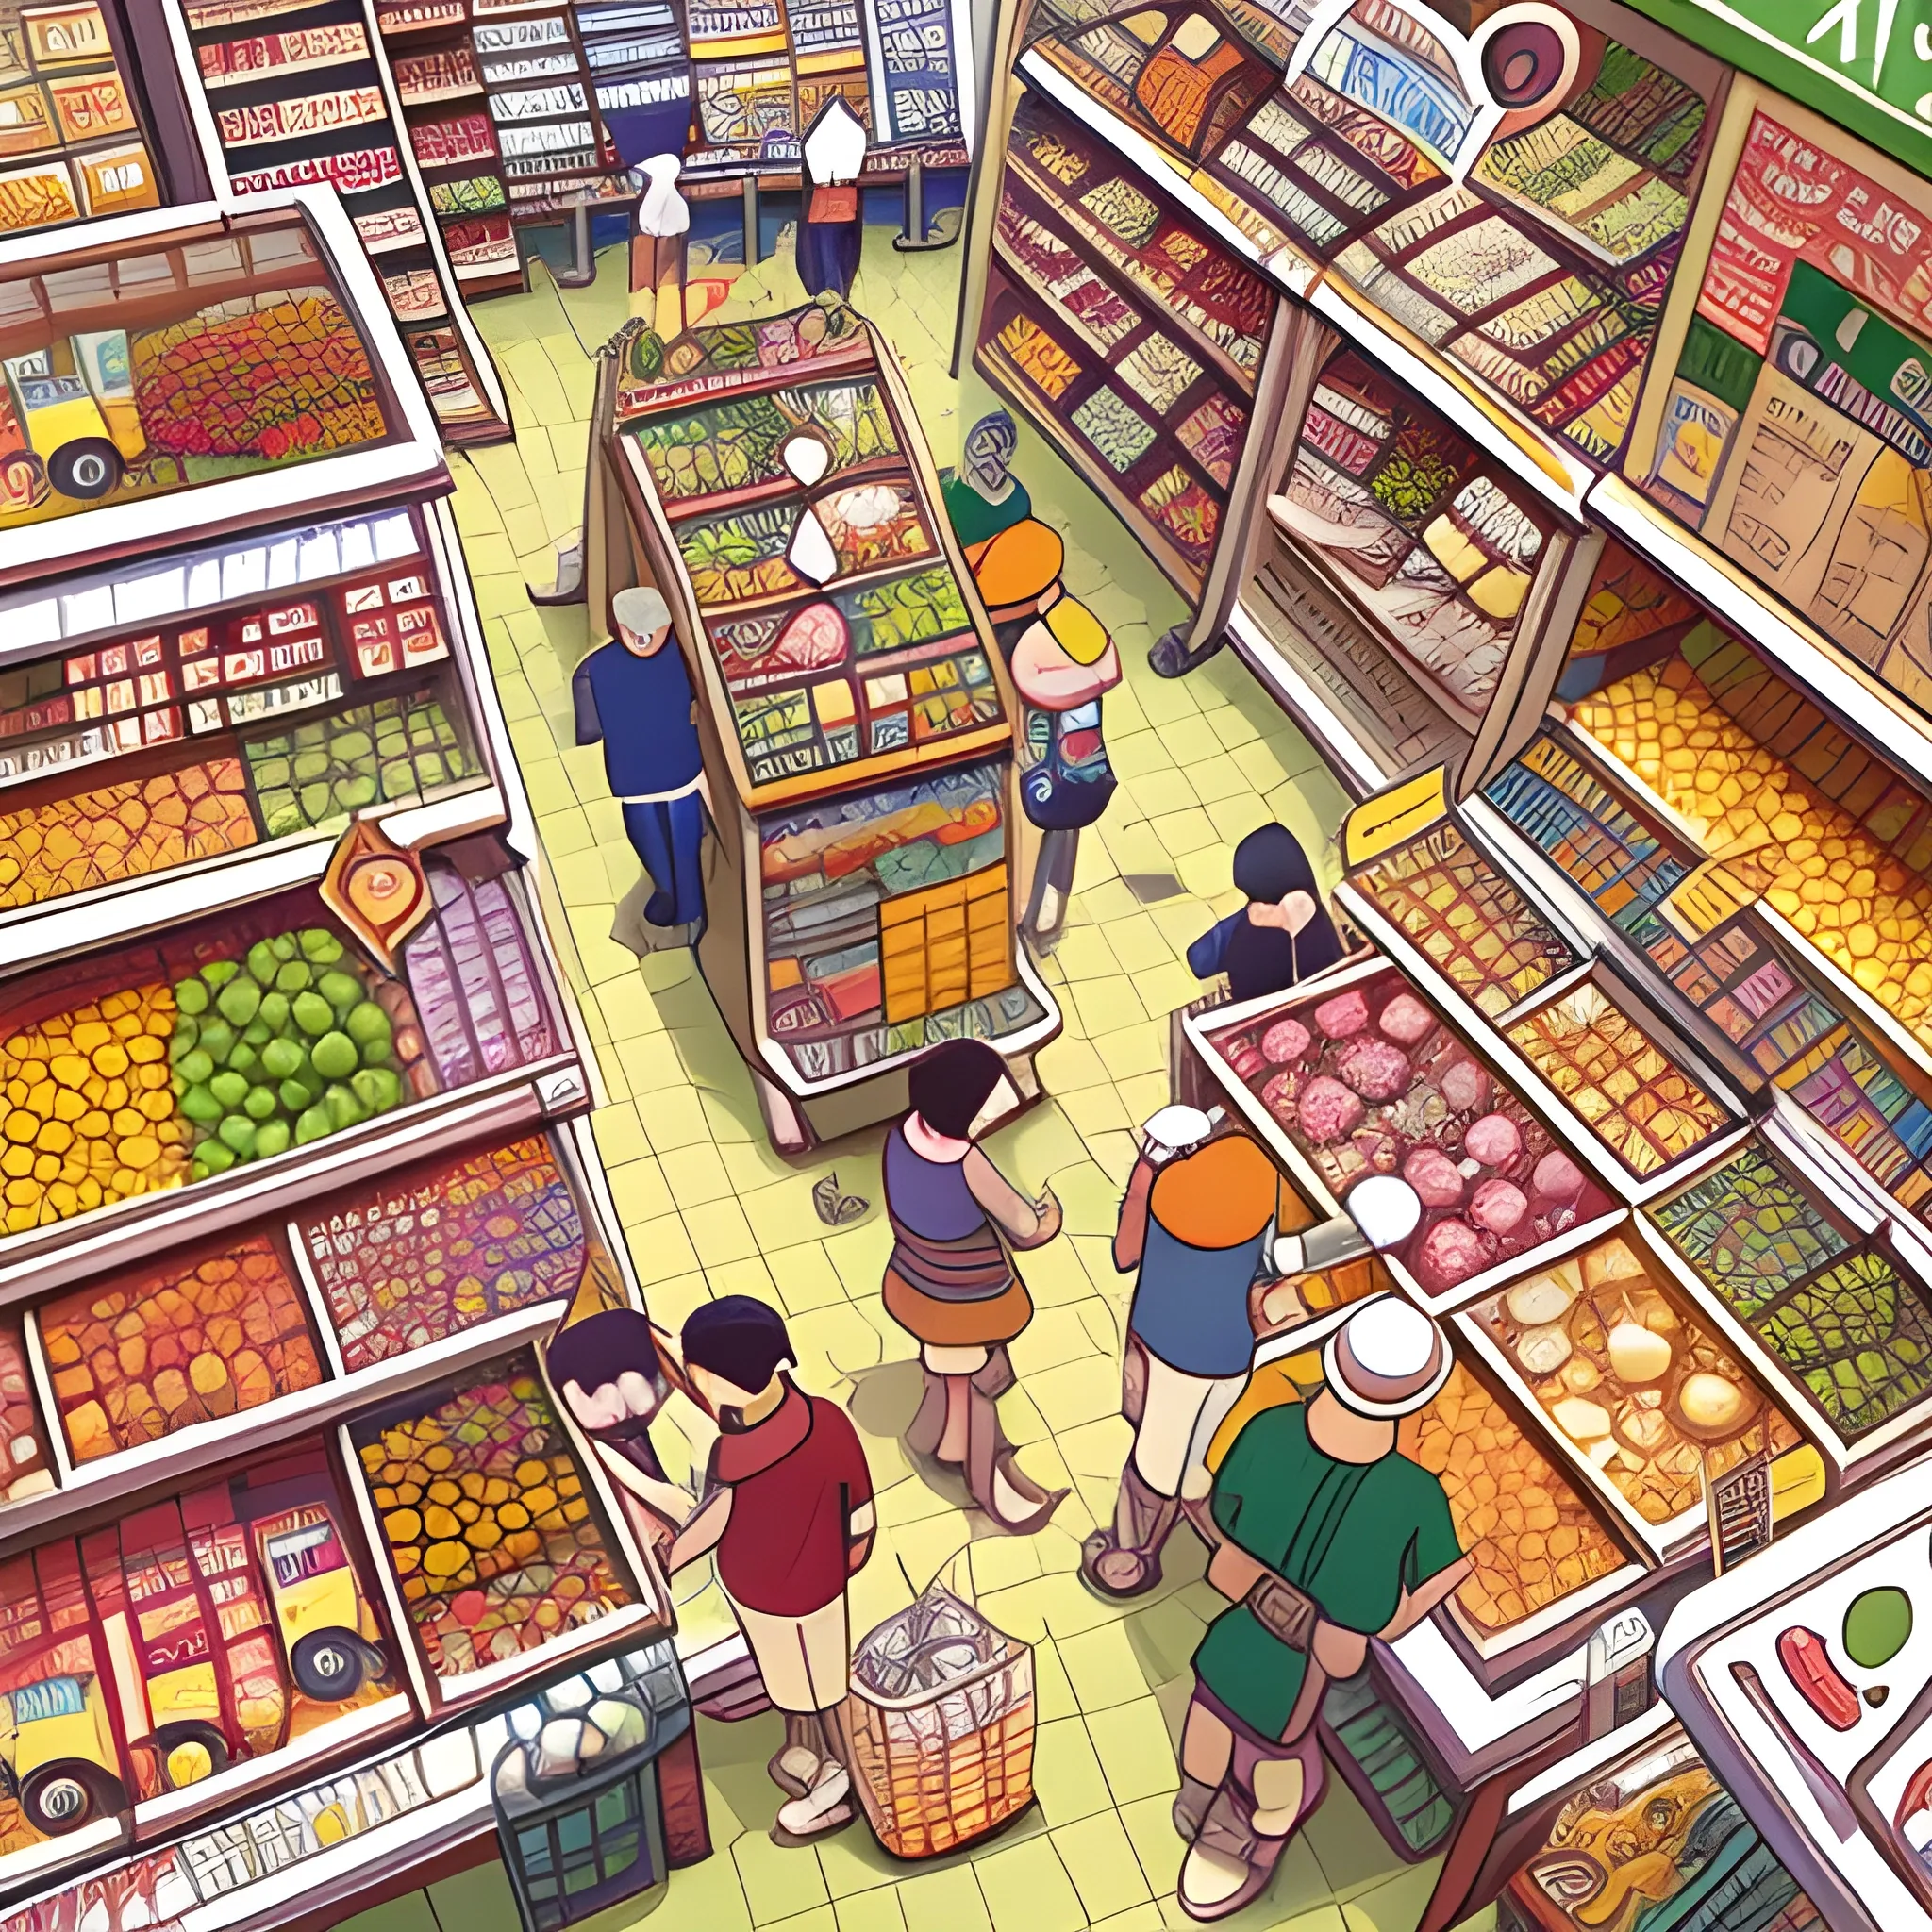 a crowded scene in an supermarket, open plan, top view, by jeff carslile, colorful, intricate, highly detailed, rich colors,  cartoonish, studio ghibli, where's waldo style